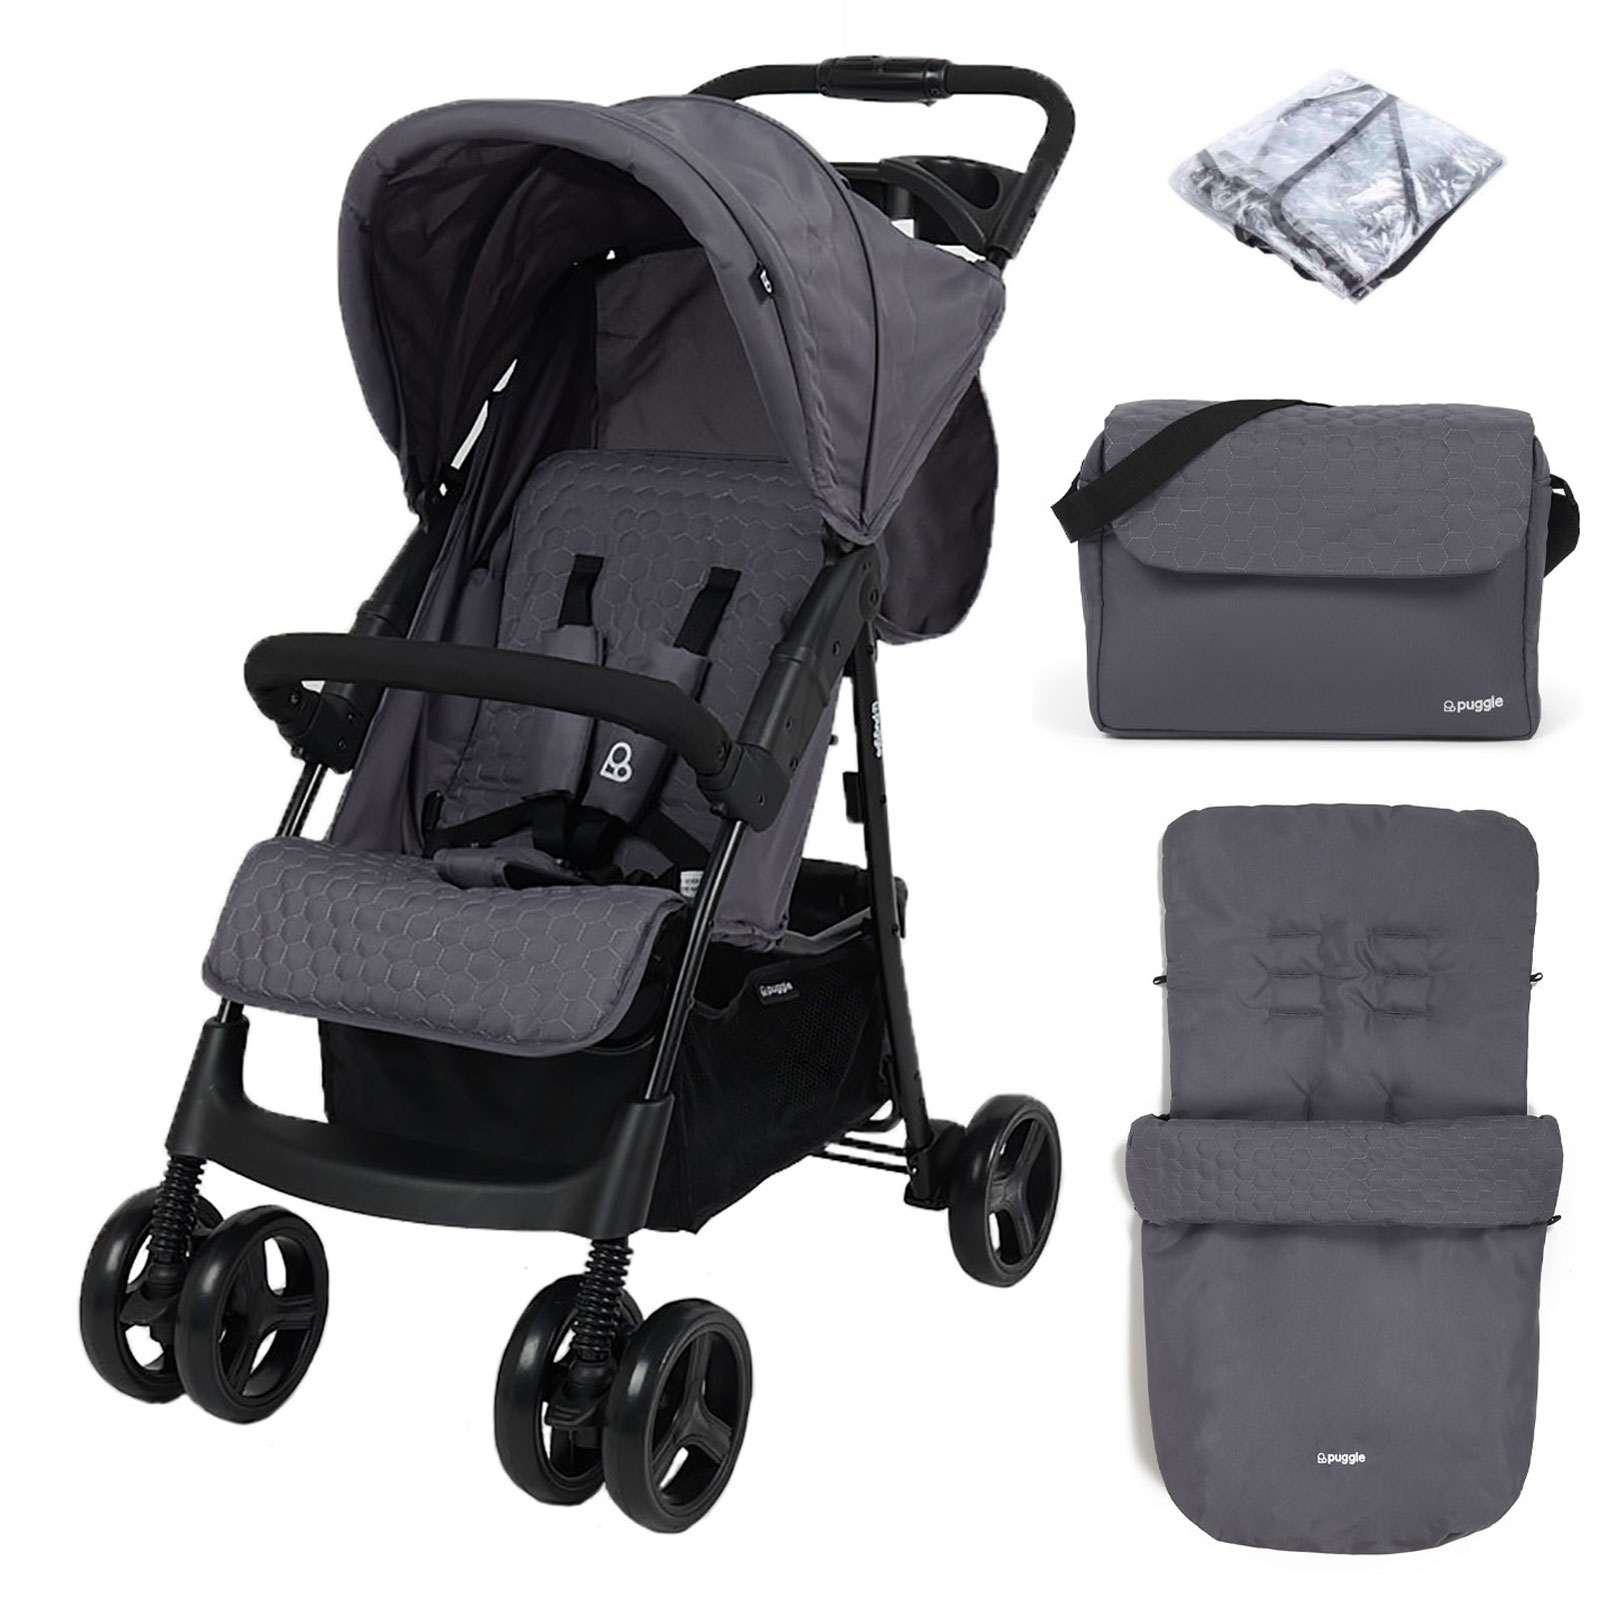 Puggle Starmax Pushchair Stroller with Raincover, Universal Footmuff and Changing Bag with Mat – Slate Grey